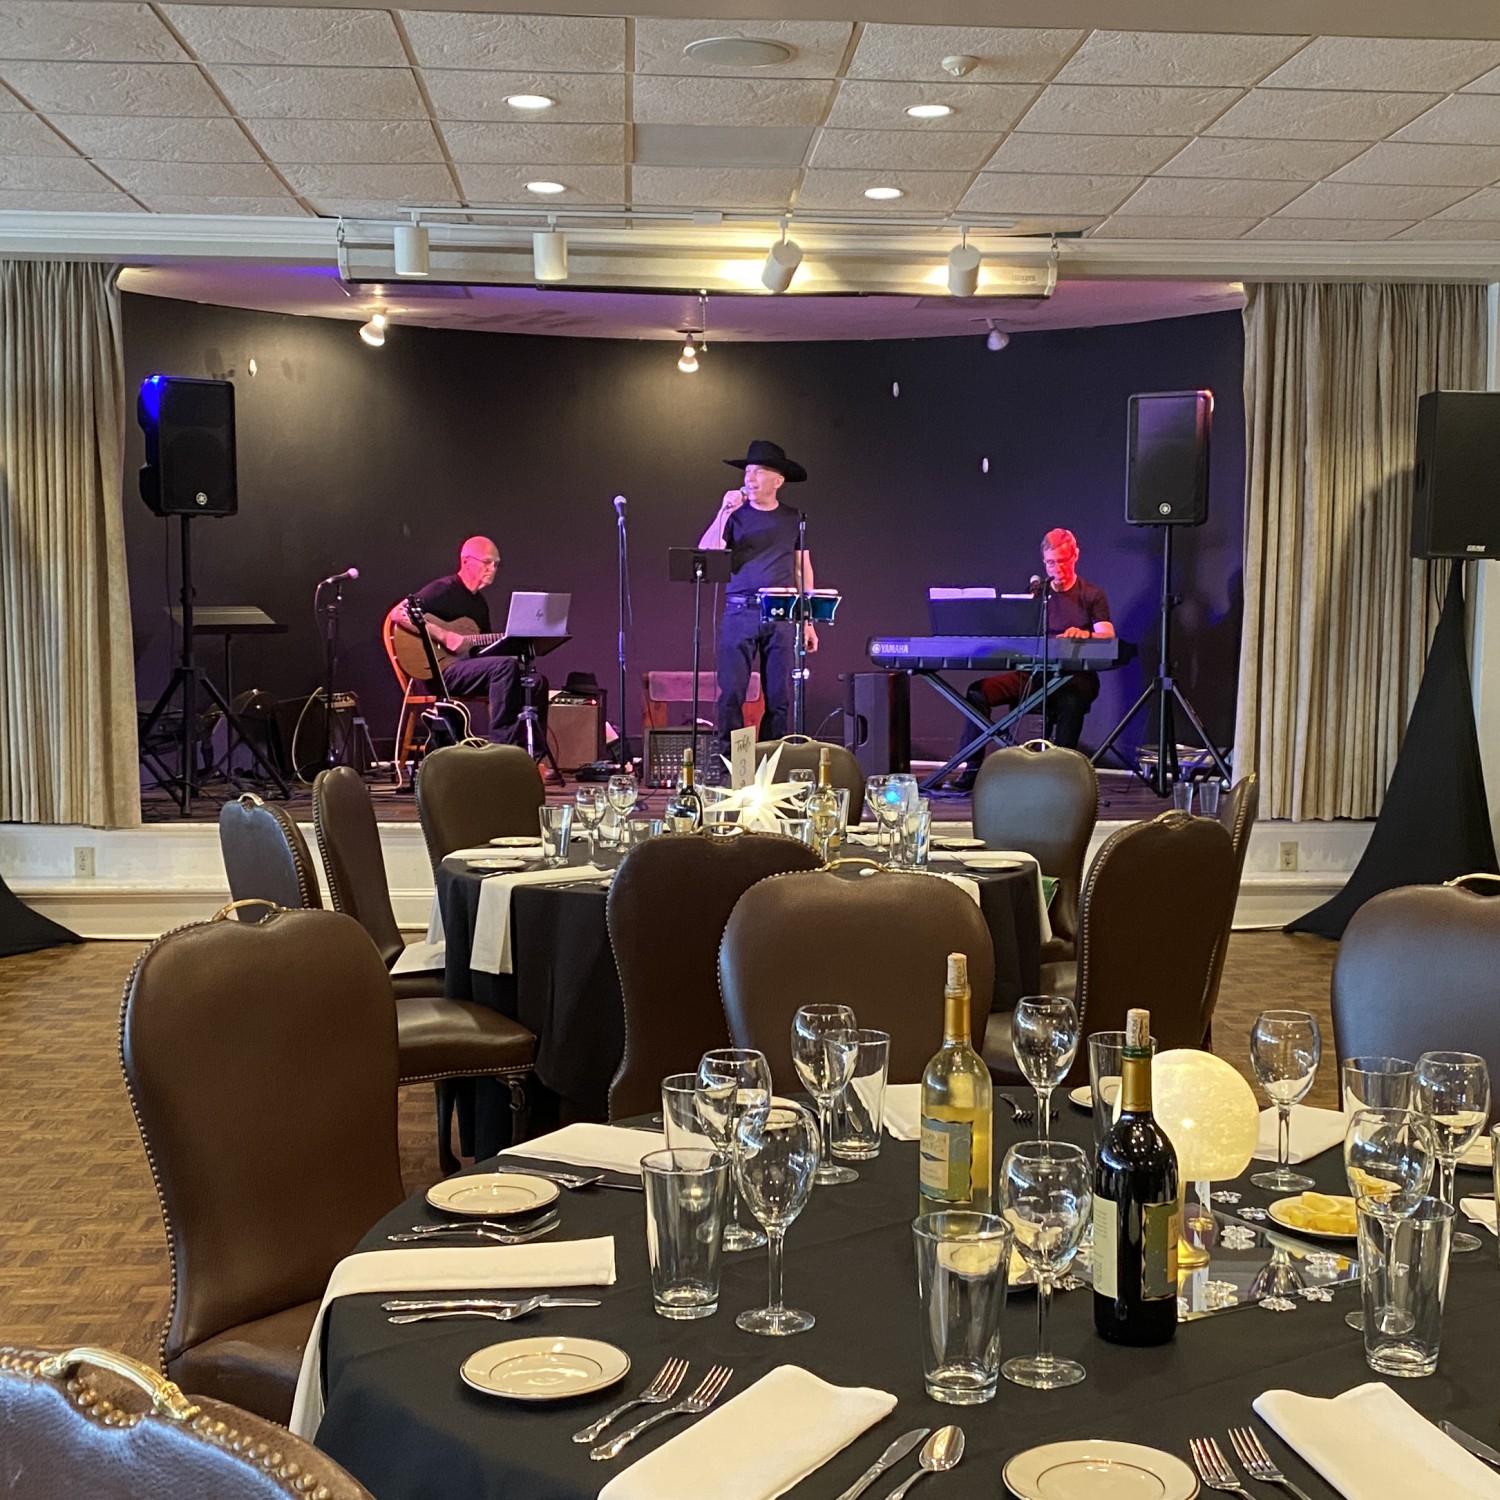 An elegantly decorated round dining table with wine bottles and empty glassware and plates sits in the foreground; a stage with a signer in a cowboy hat and jeans, an electronic keyboard and player, and a guitar player, do a sound check for the event that is happening soon.